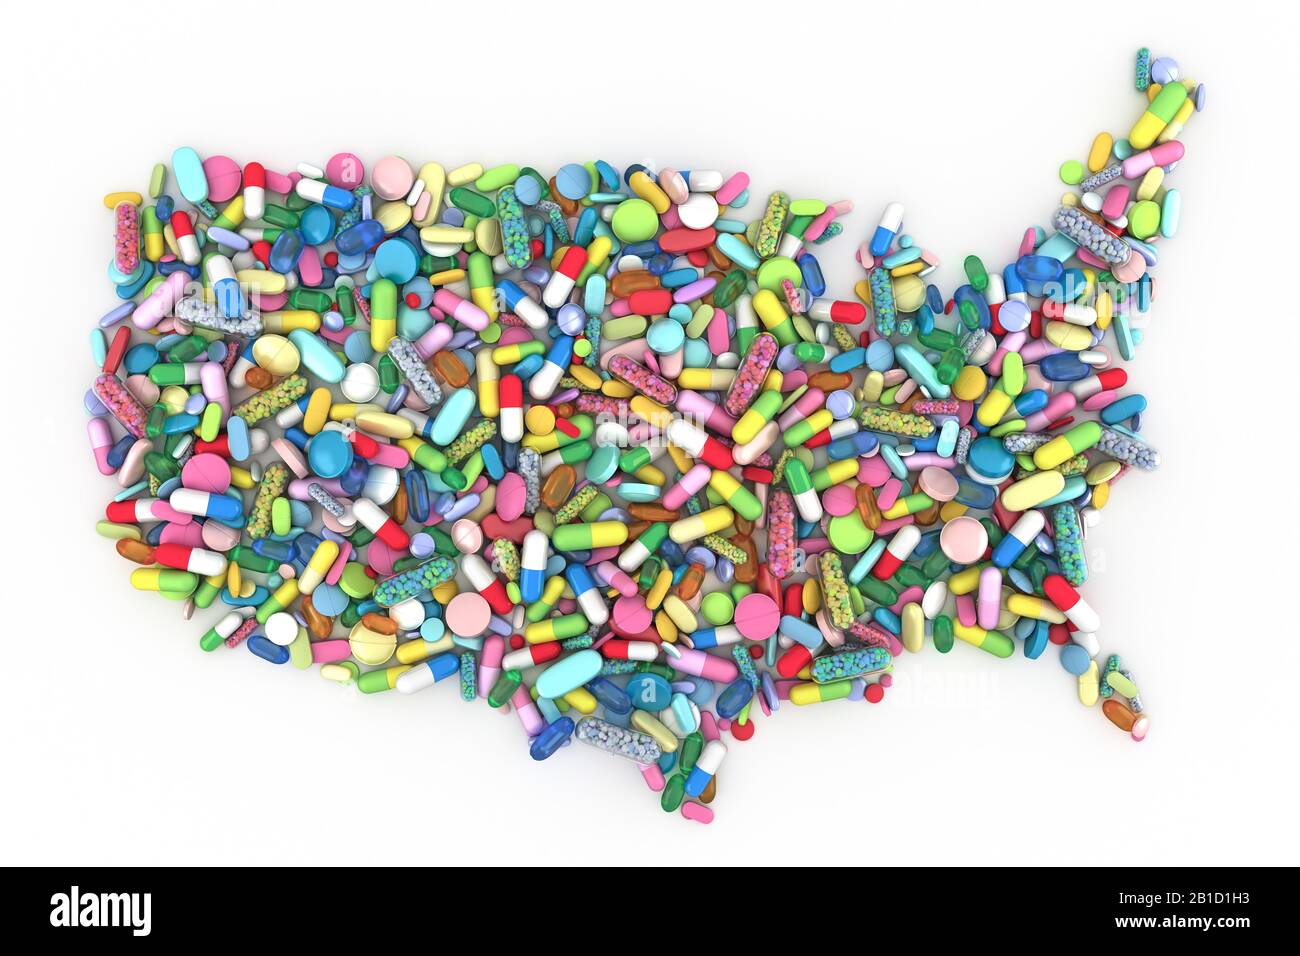 Pills and medication in the shape of the United States of America Stock Photo